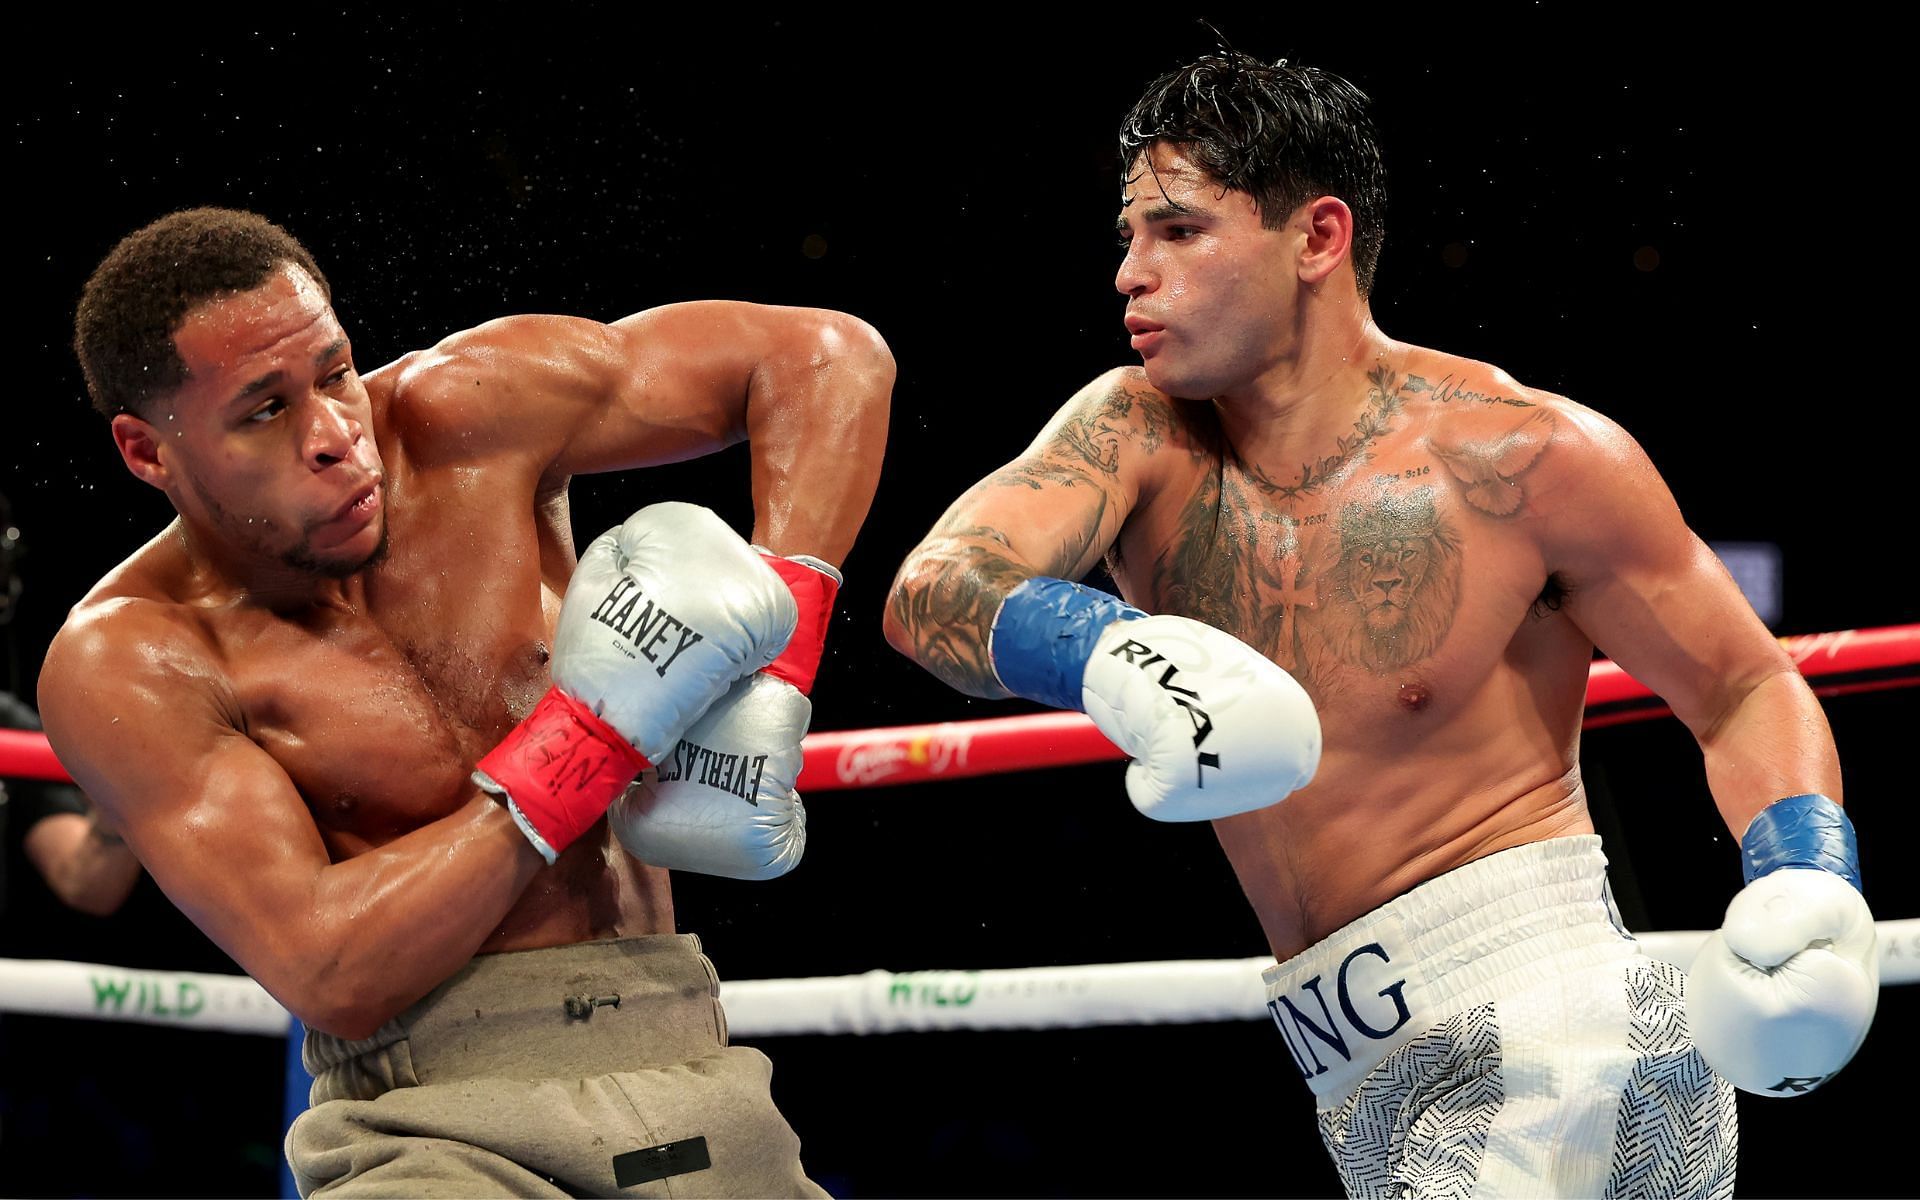 Devin Haney (left) suffered his first professional boxing defeat, a majority decision loss against Ryan Garcia (right) [Image courtesy: Getty Images]